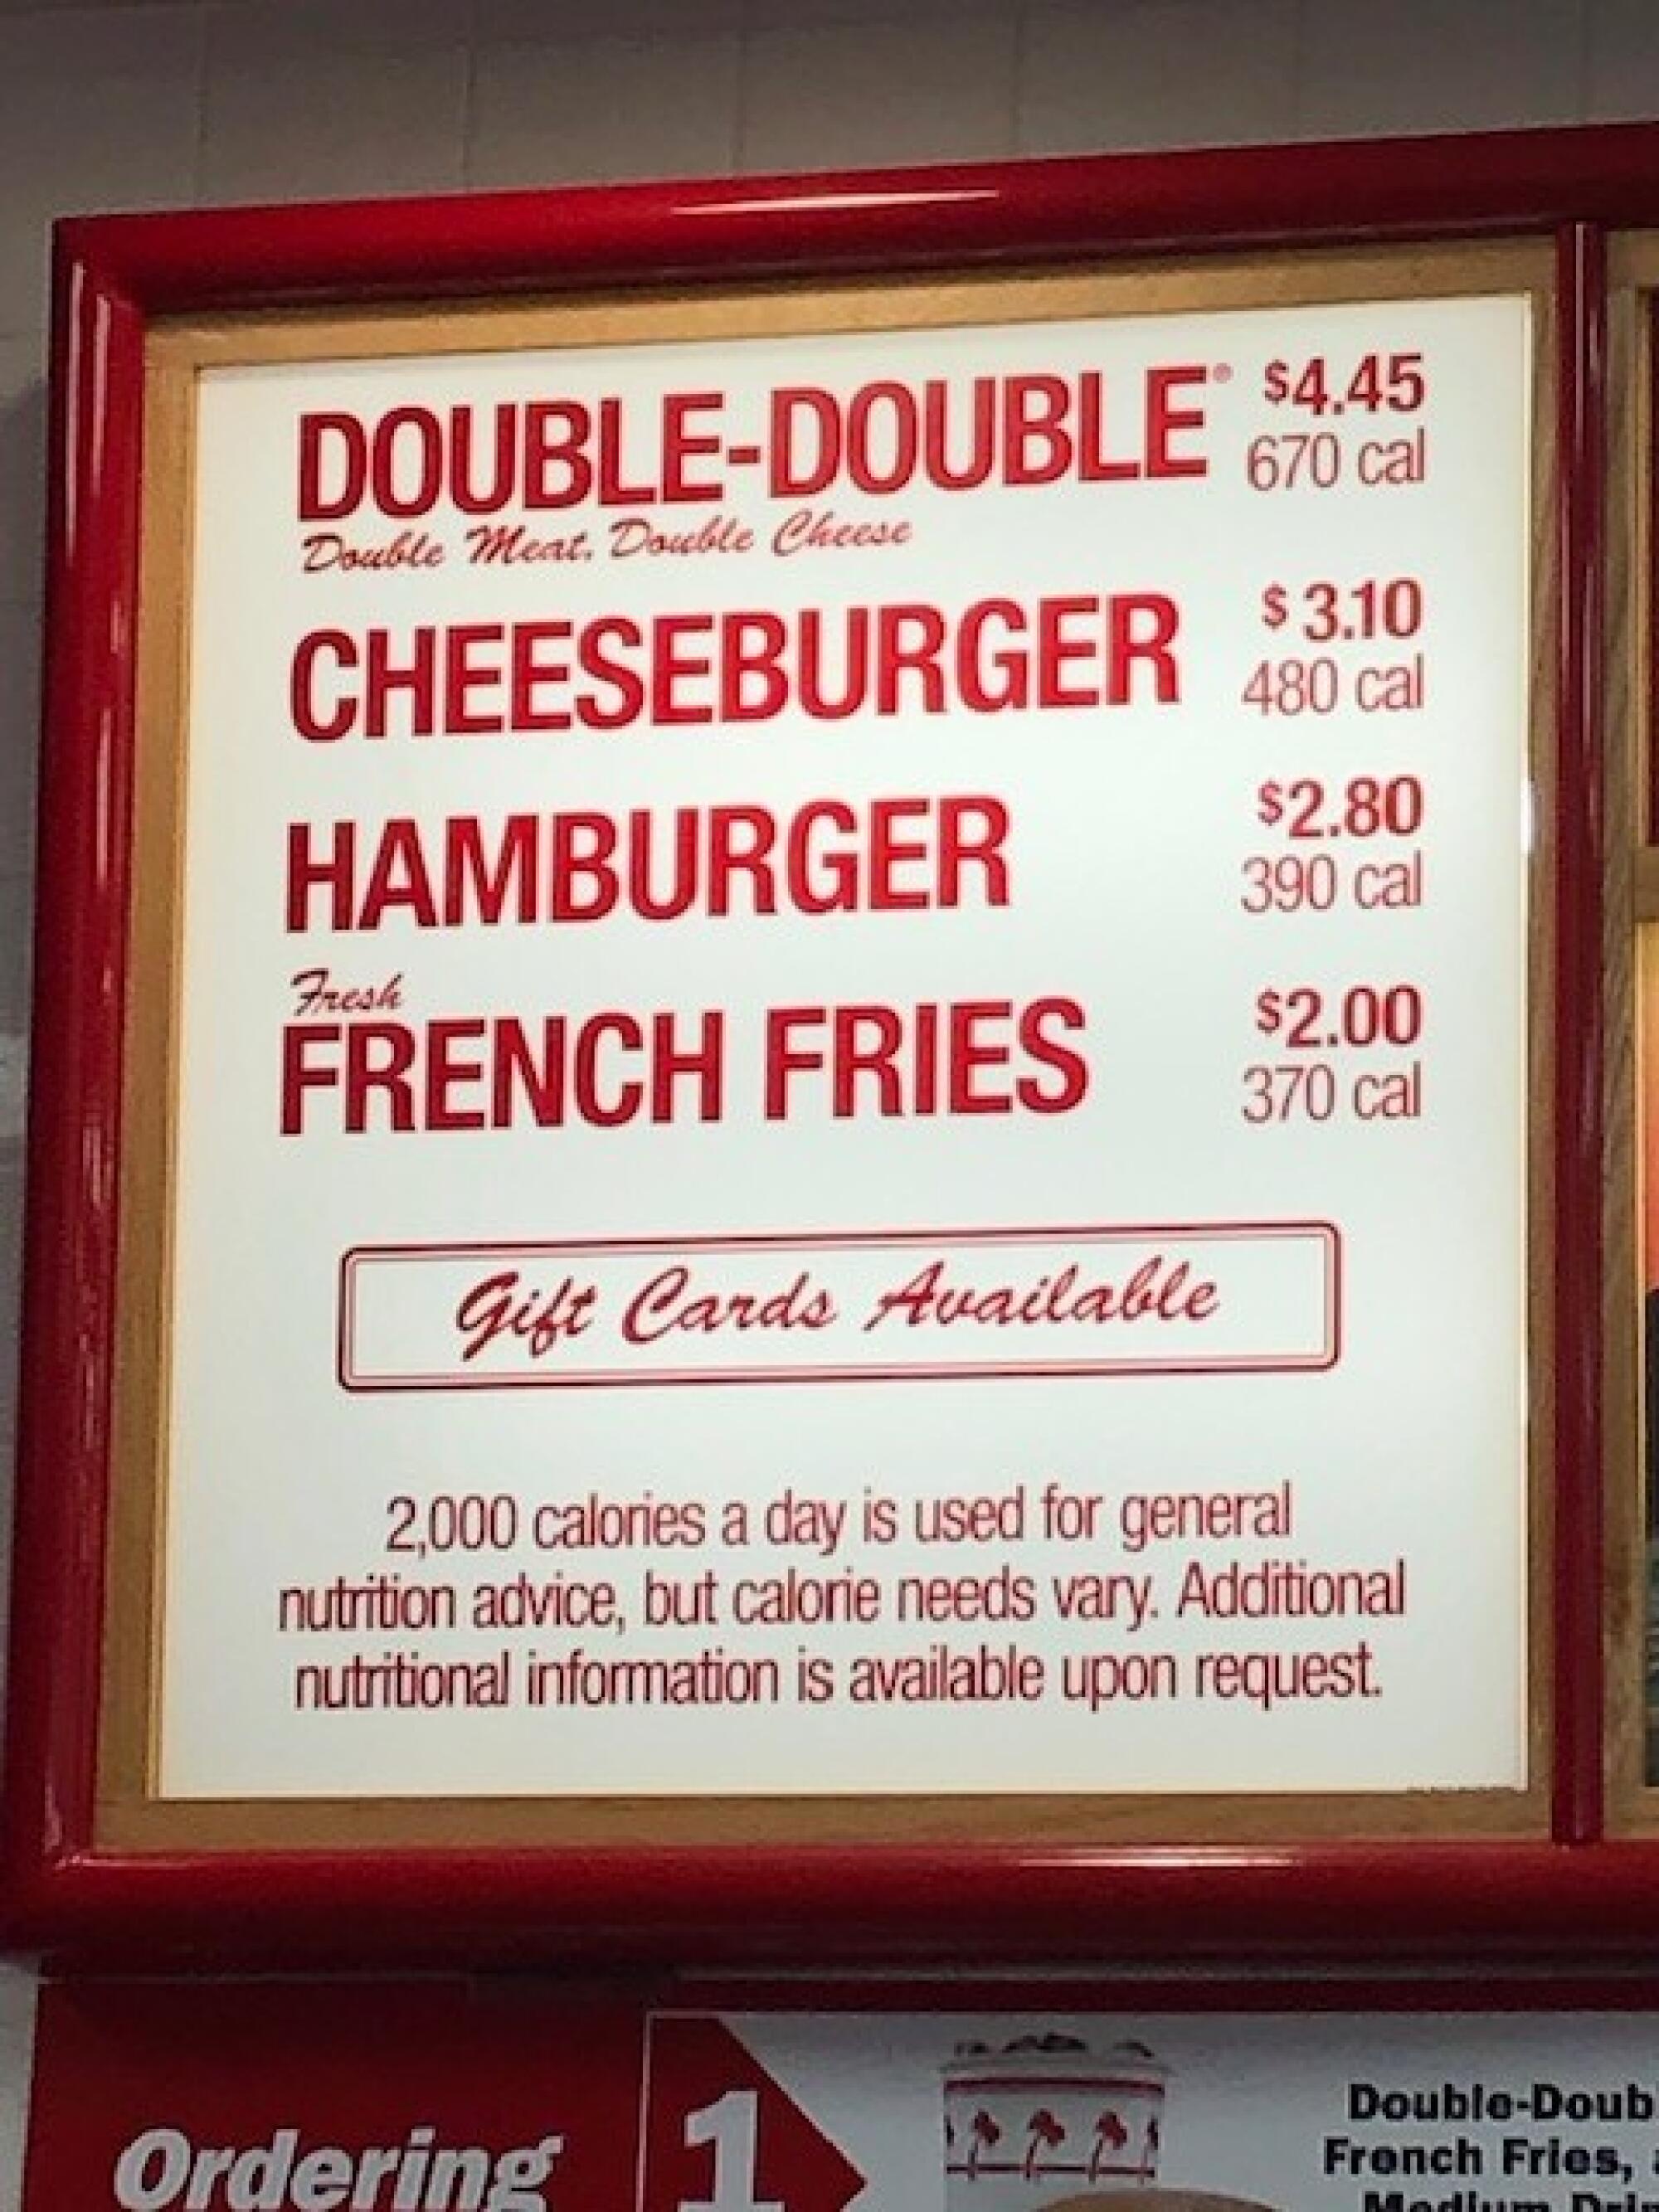 The classic In-N-Out menu.